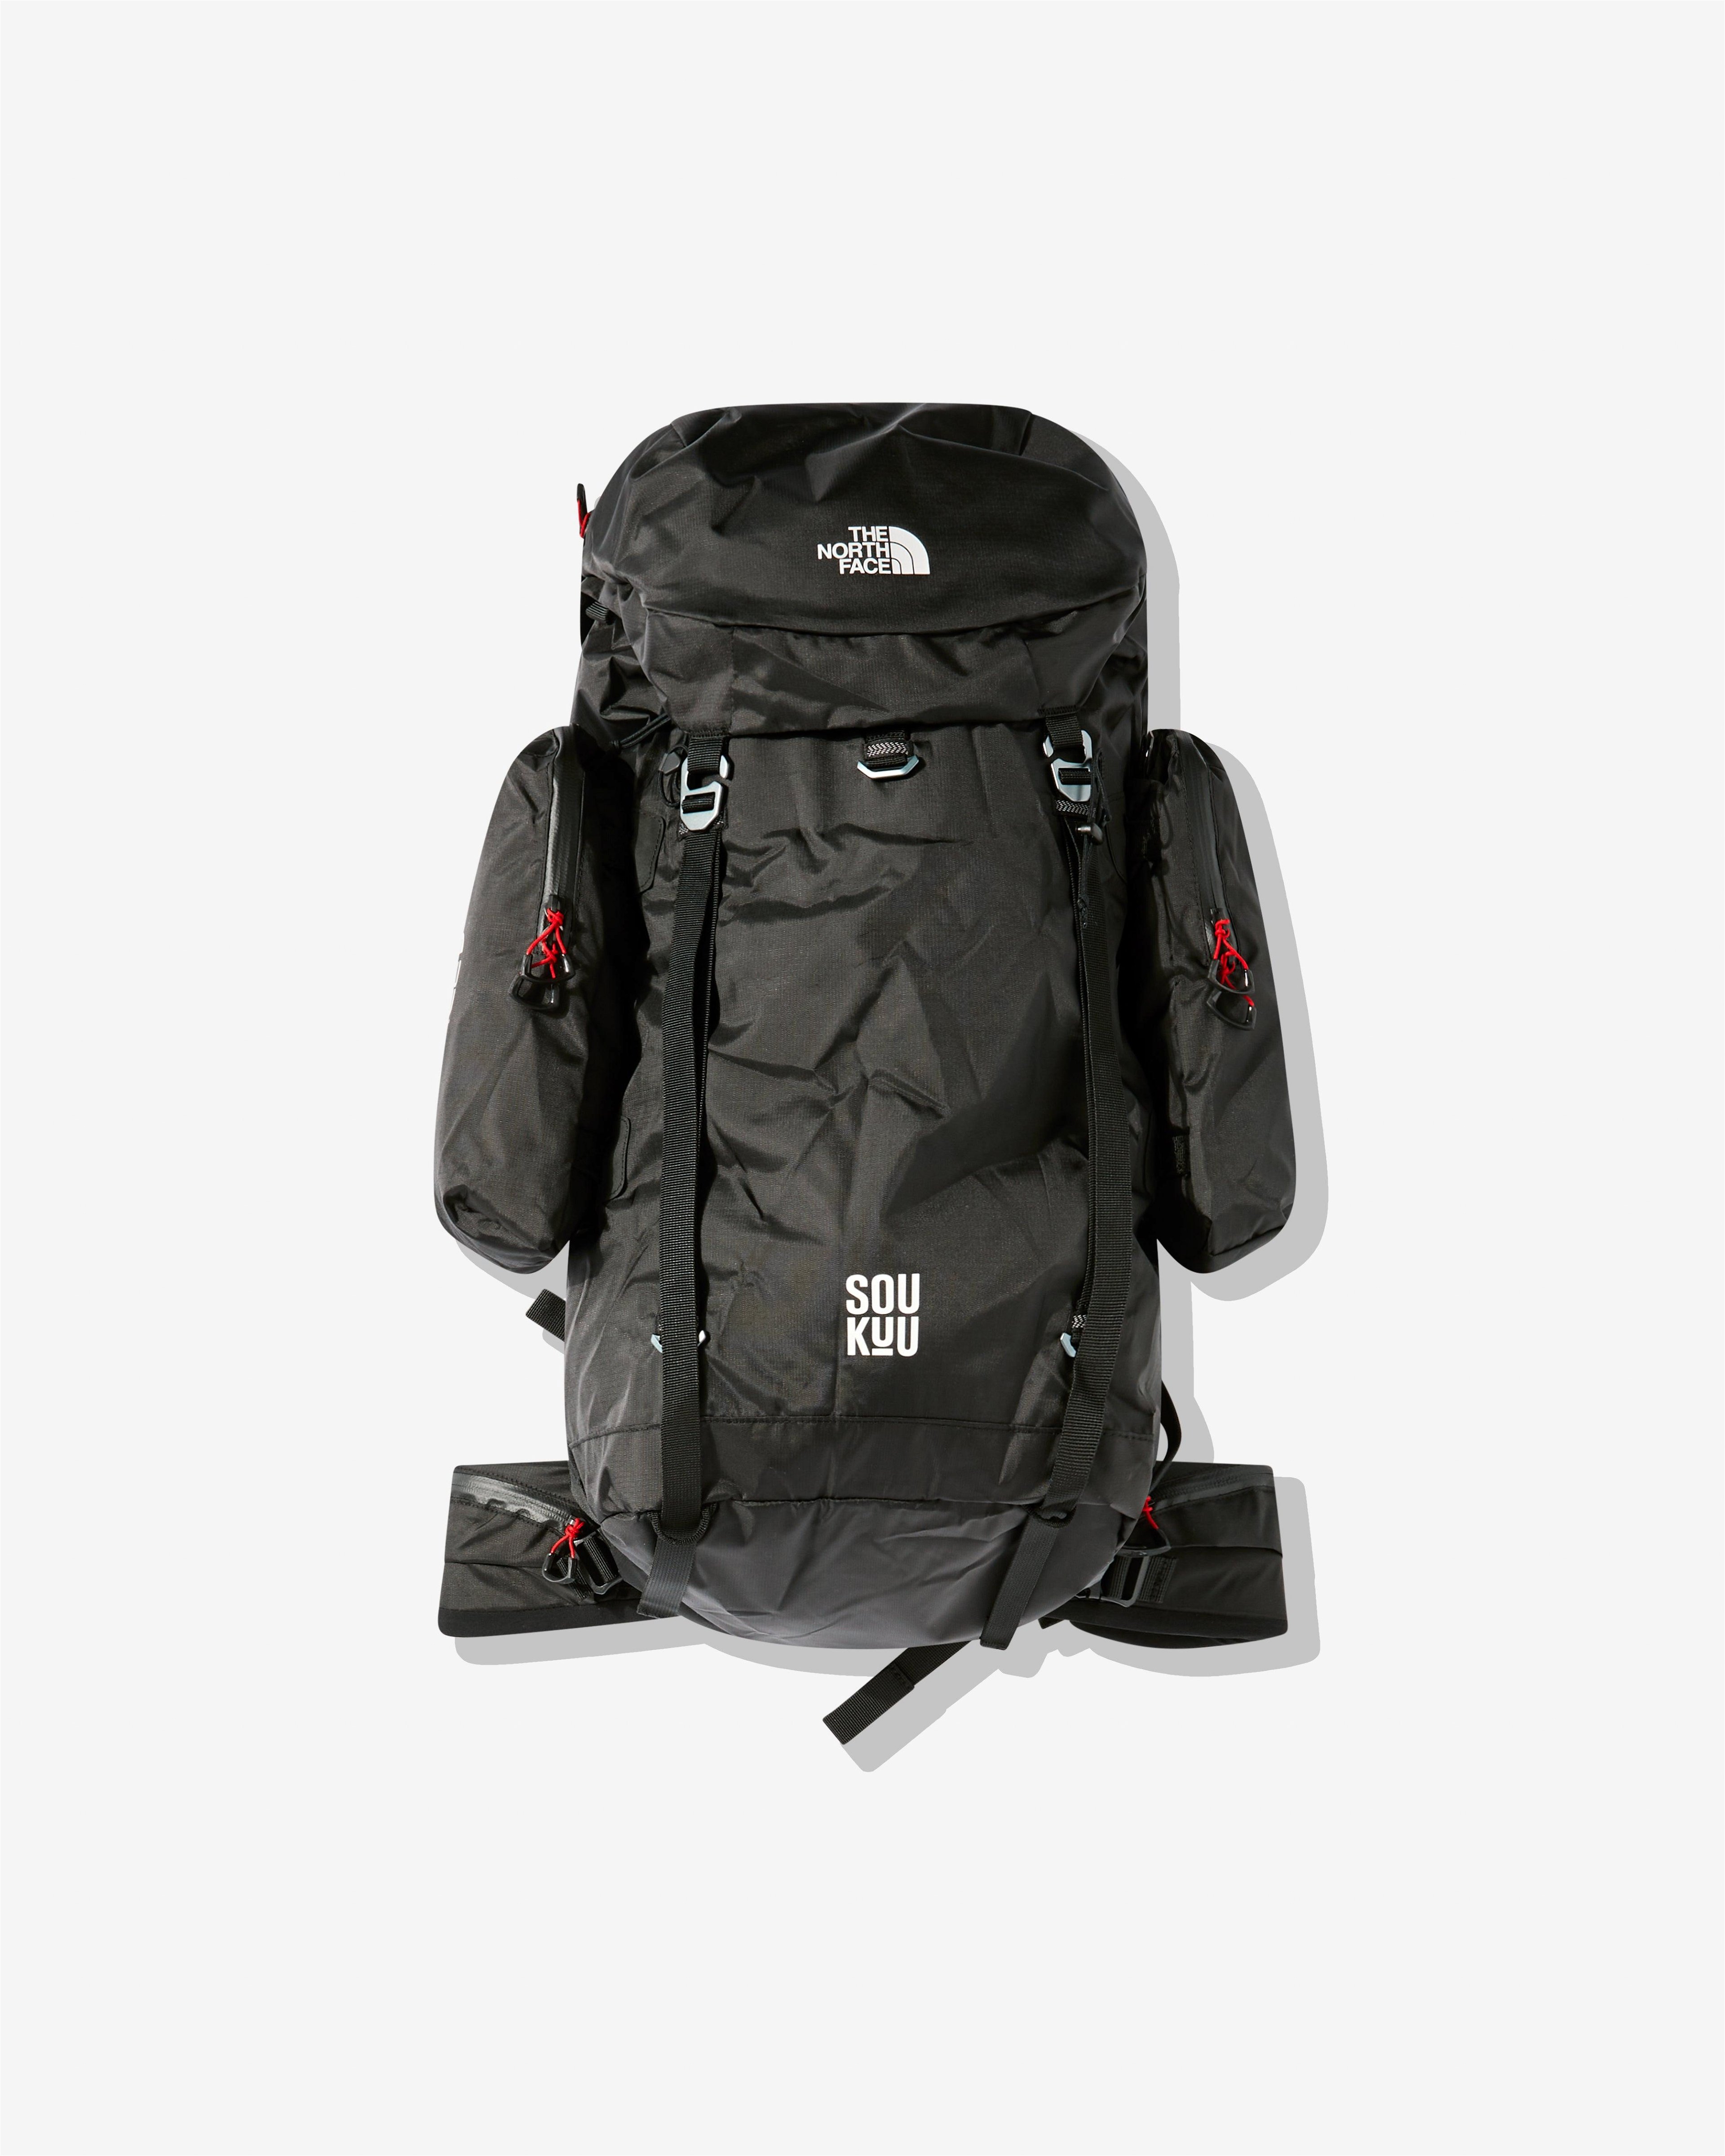 The North Face - Undercover Soukuu Hike 38L Backpack - (Black) by THE NORTH FACE